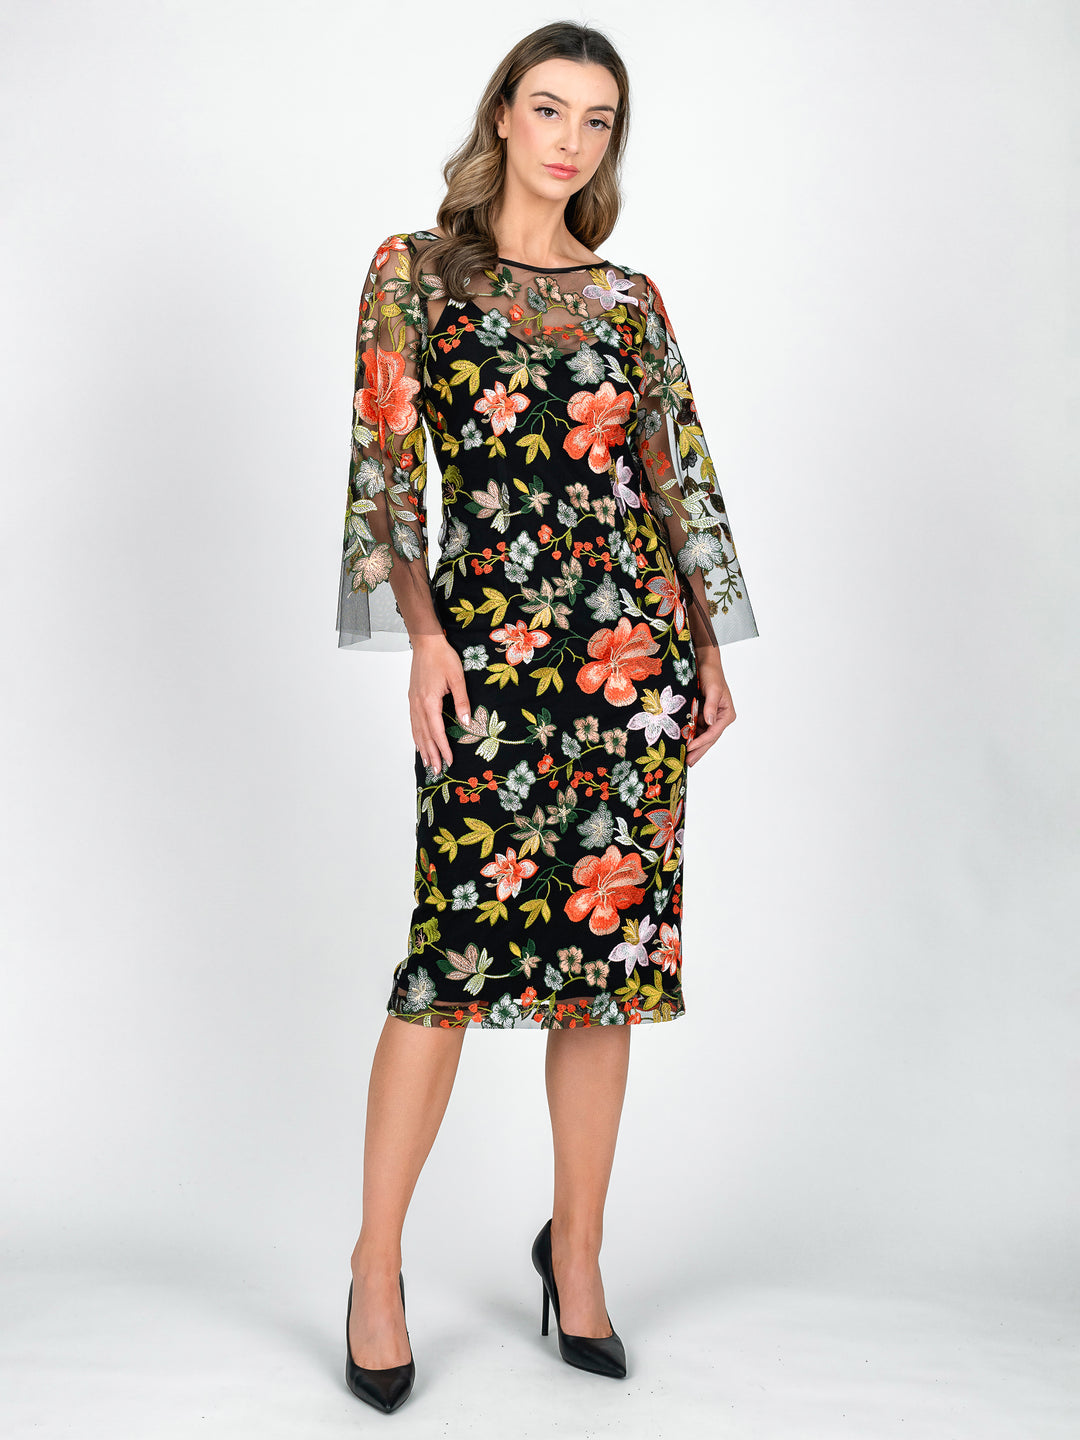 Lisa Barron 3/4 Sleeve boat neck cocktail dress in yellow, green and orange floral embroidery. Garden winery wedding mother of the bride groom dress